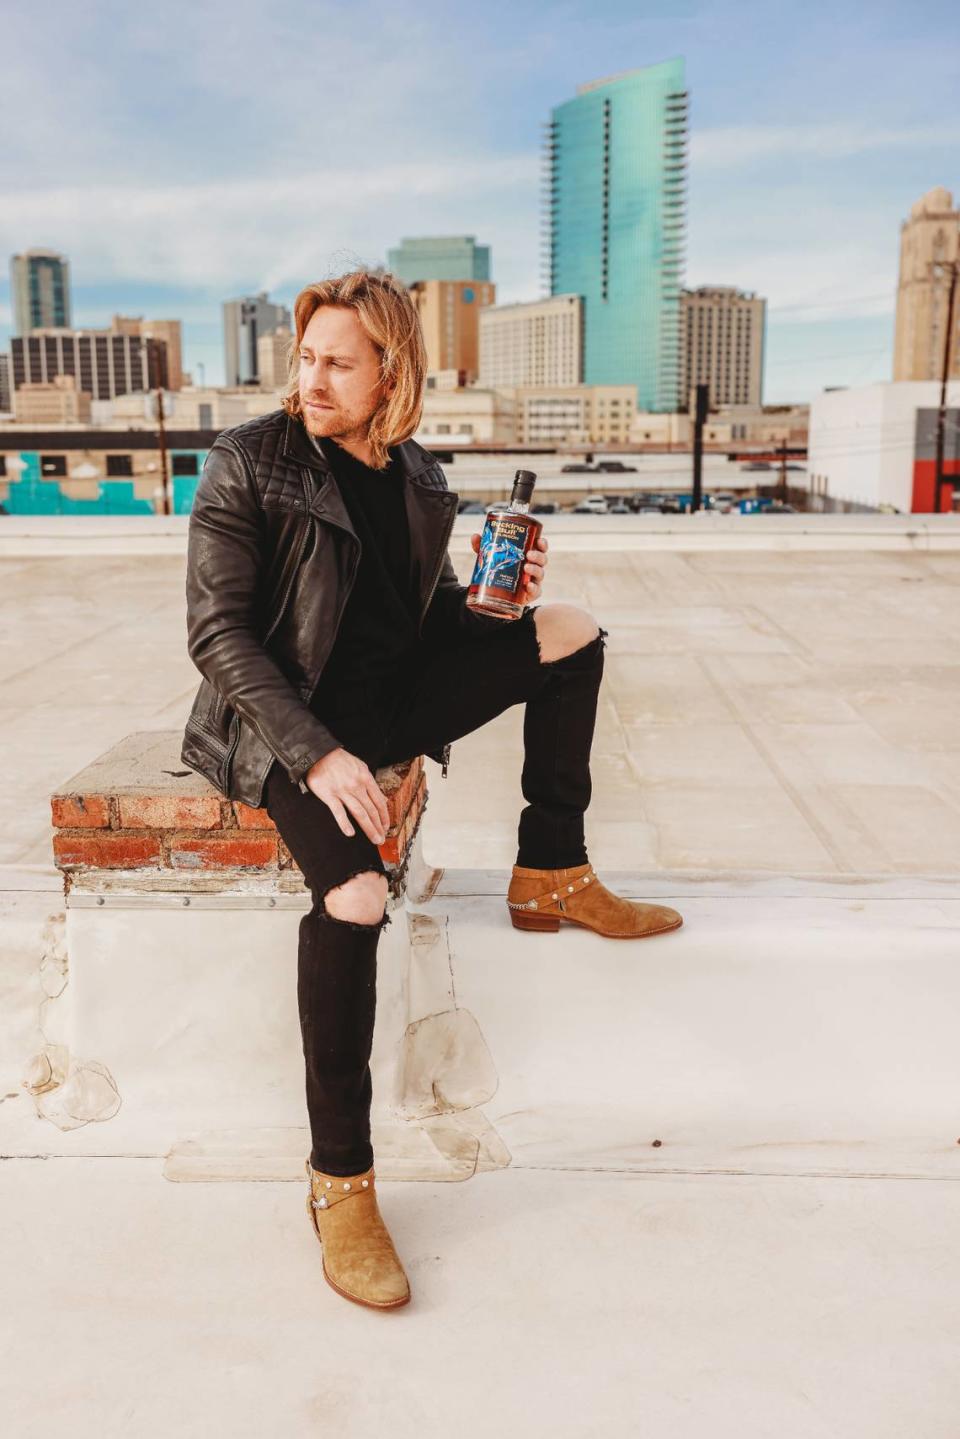 Eric Nelsen, Emmy and Tony award-winning American actor and producer, is the brand ambassador for Bucking Bull Bourbon, a Texas whiskey available in the Dallas-Fort Worth area.